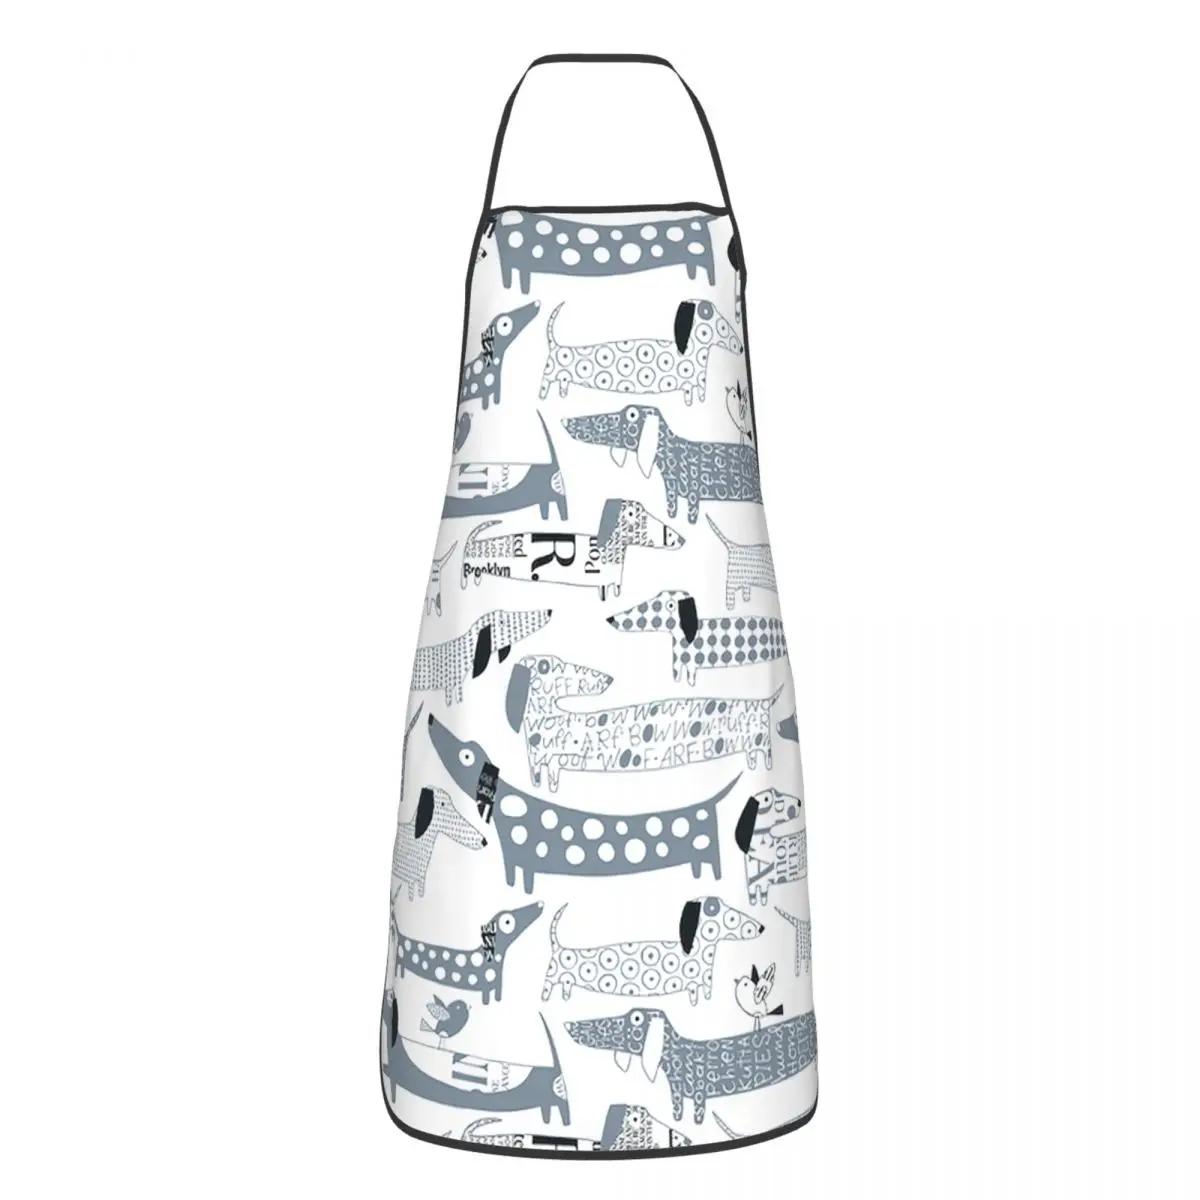 Wiener Dog Polyester Aprons 52*72cm Kitchen Grill Bib Tablier Cooking Home Cleaning Pinafores for Chef Barista